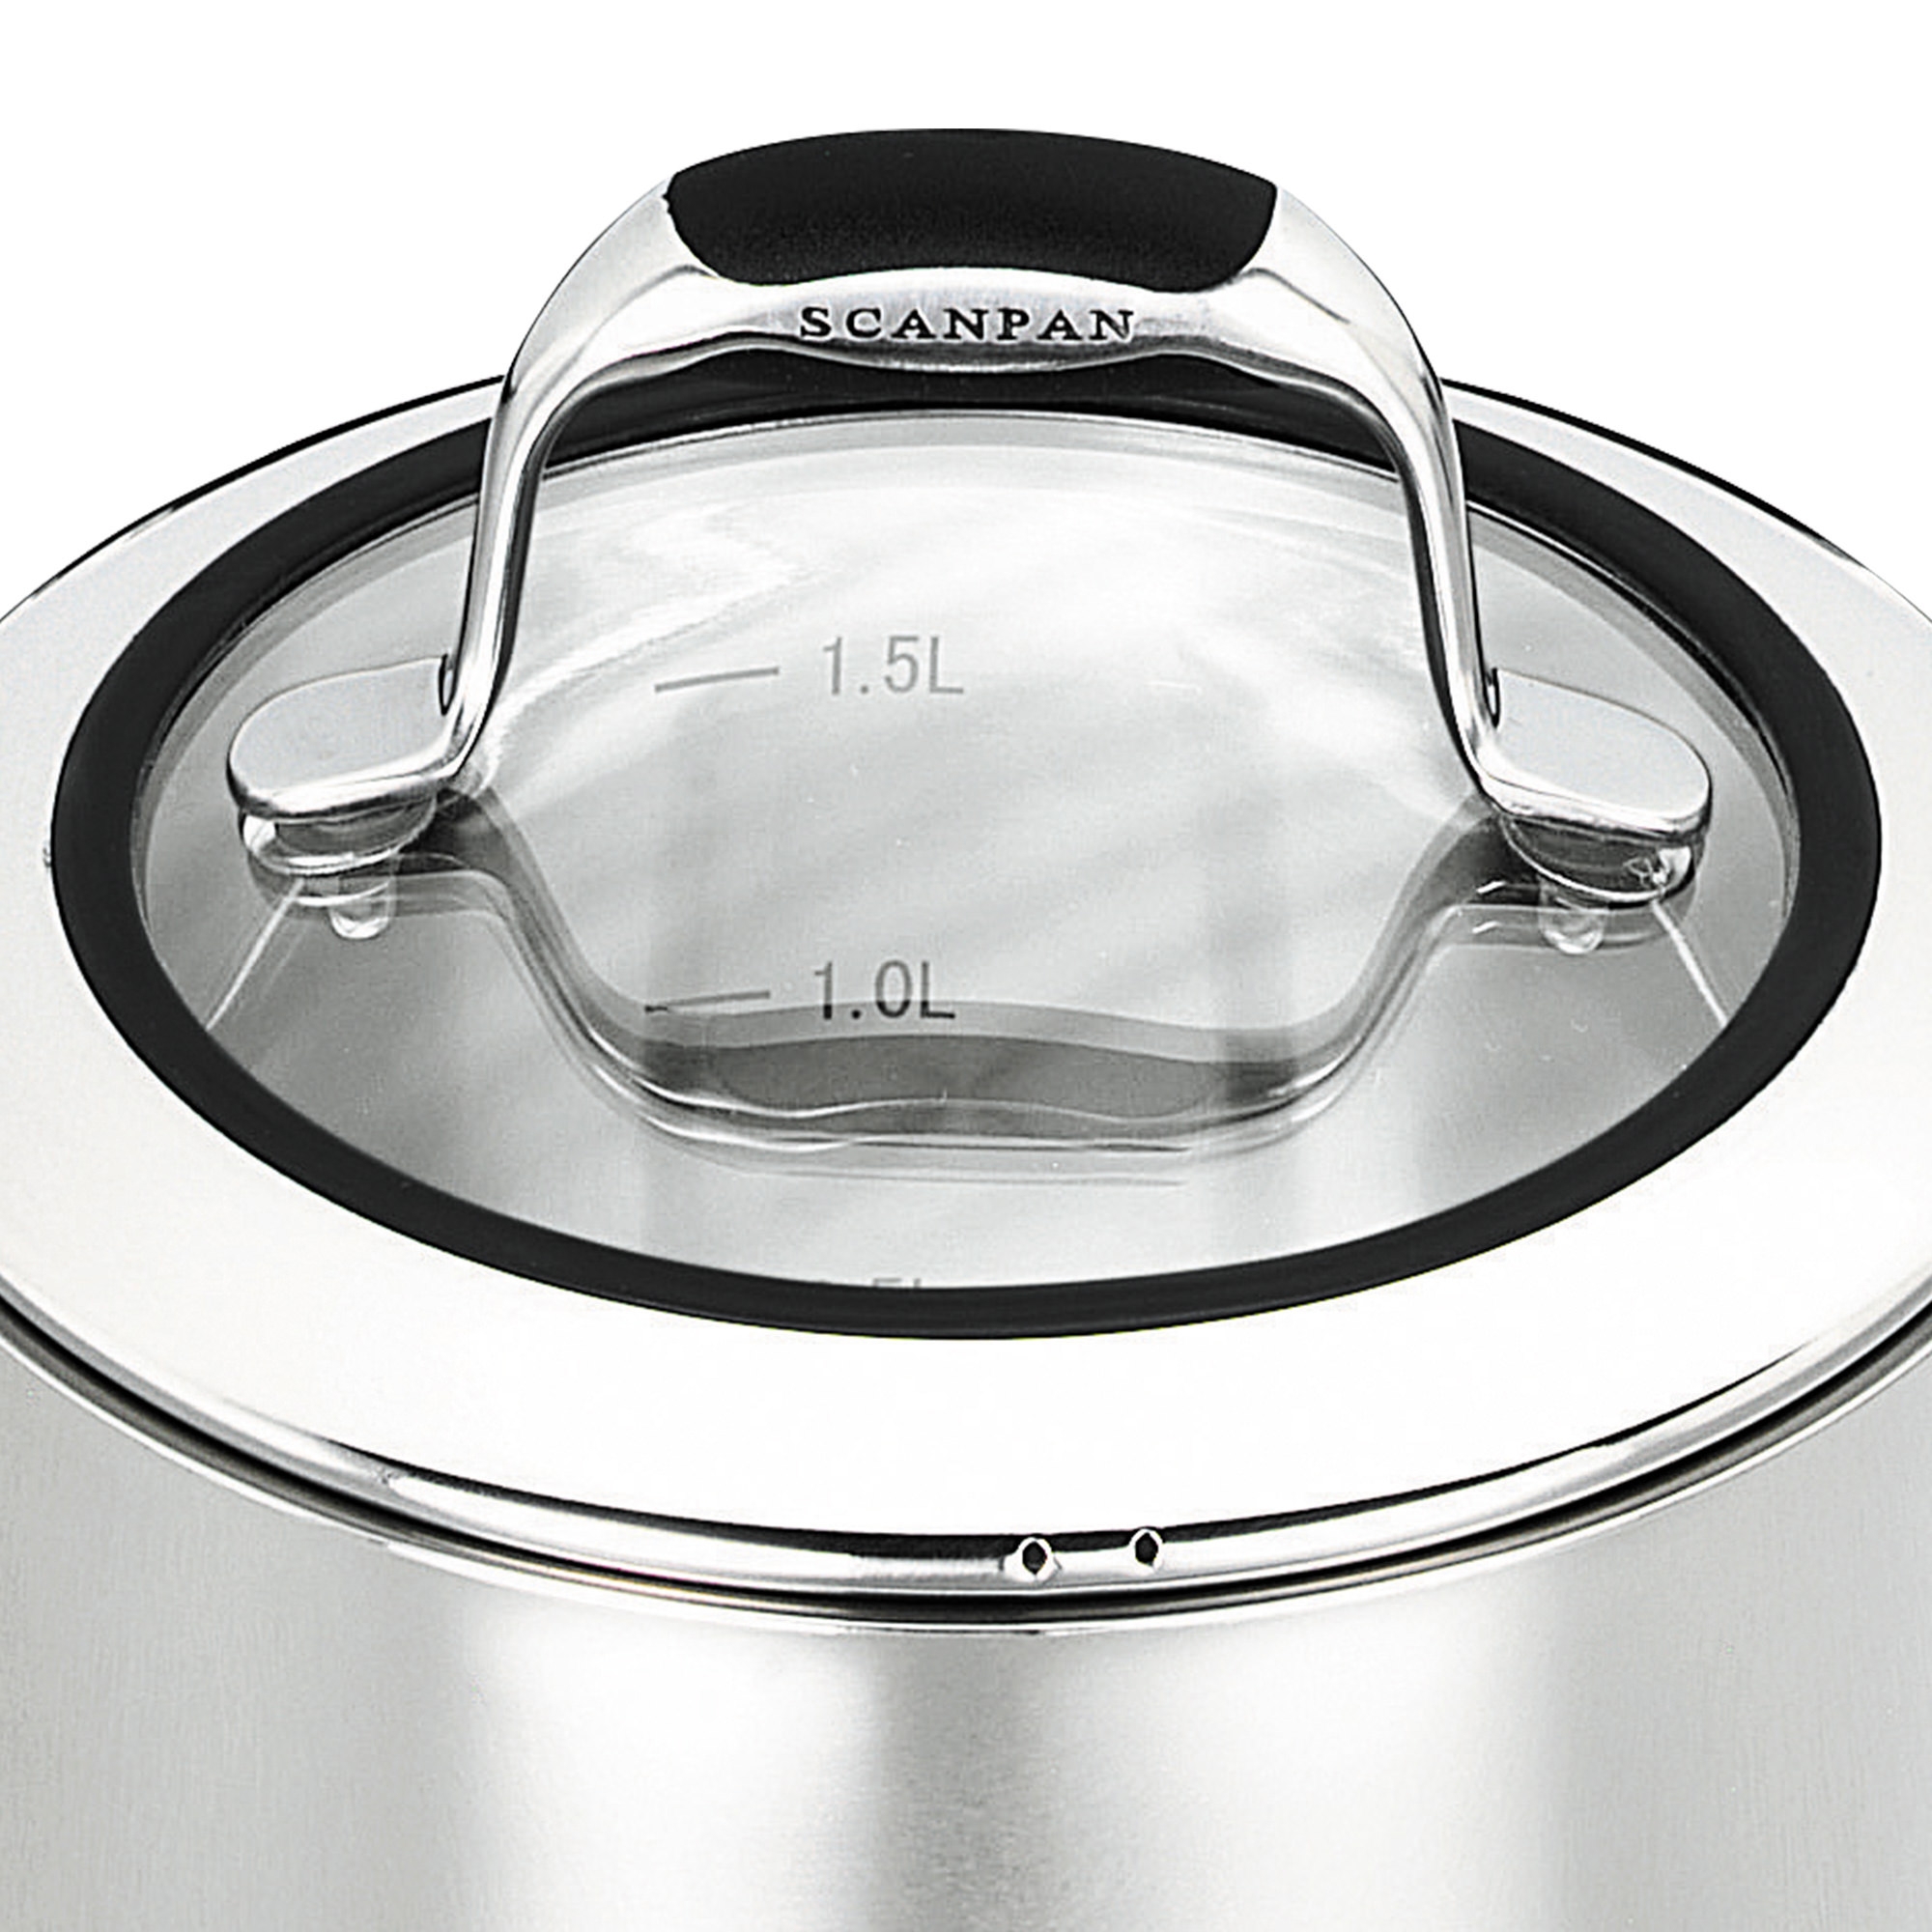 Scanpan Coppernox Stainless Steel Covered Saucepan 16cm - 1.8L Image 2